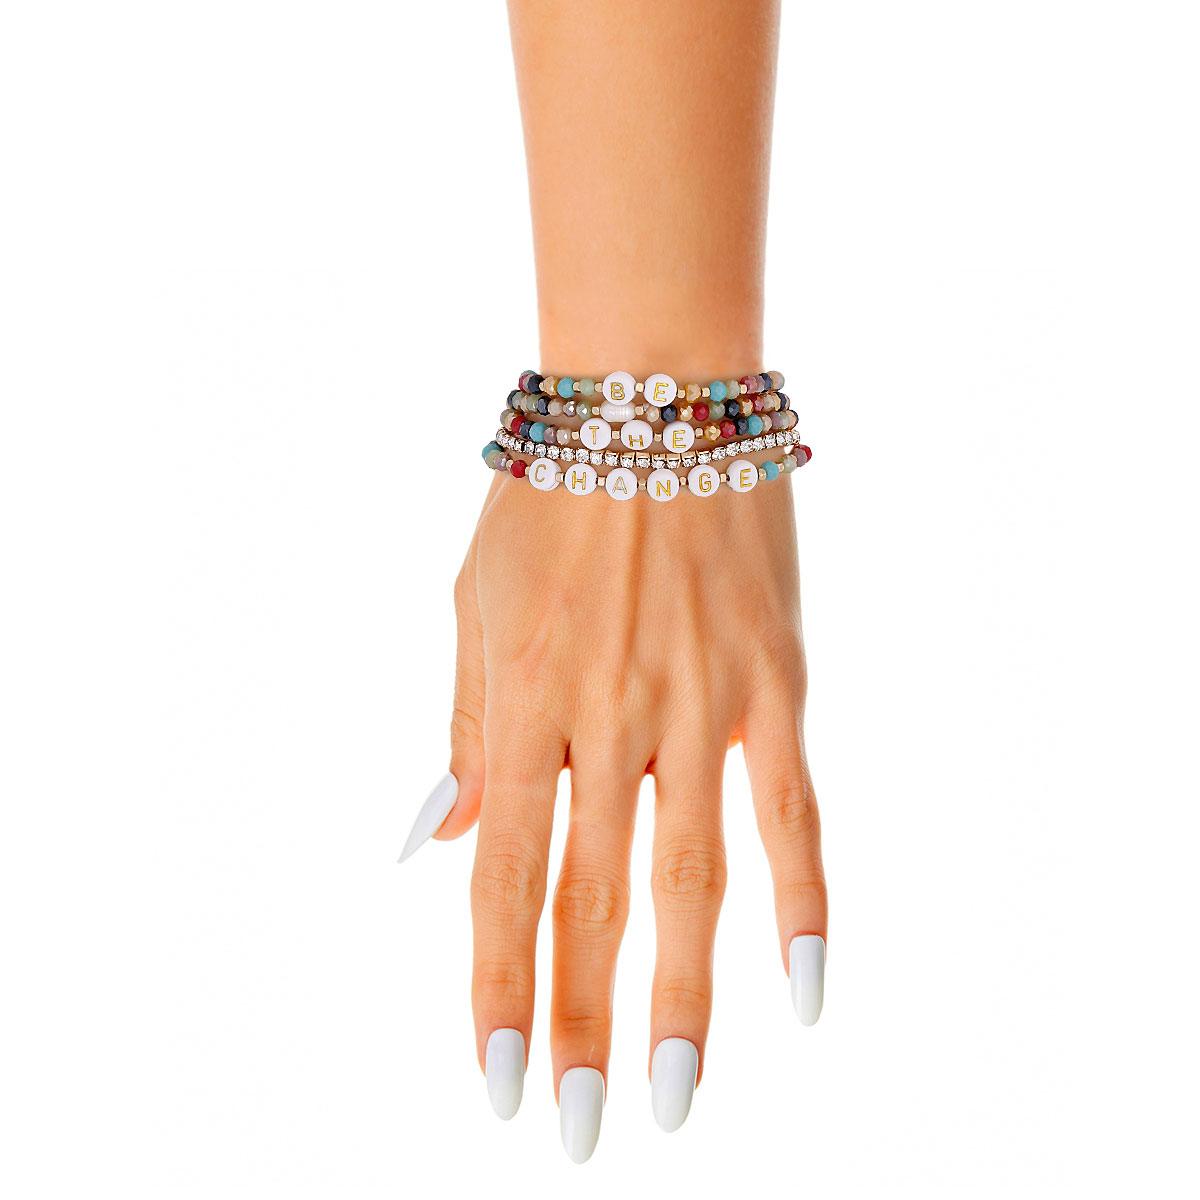 Shop Now: Beaded Bracelets for Women - Symbolize Change Today!